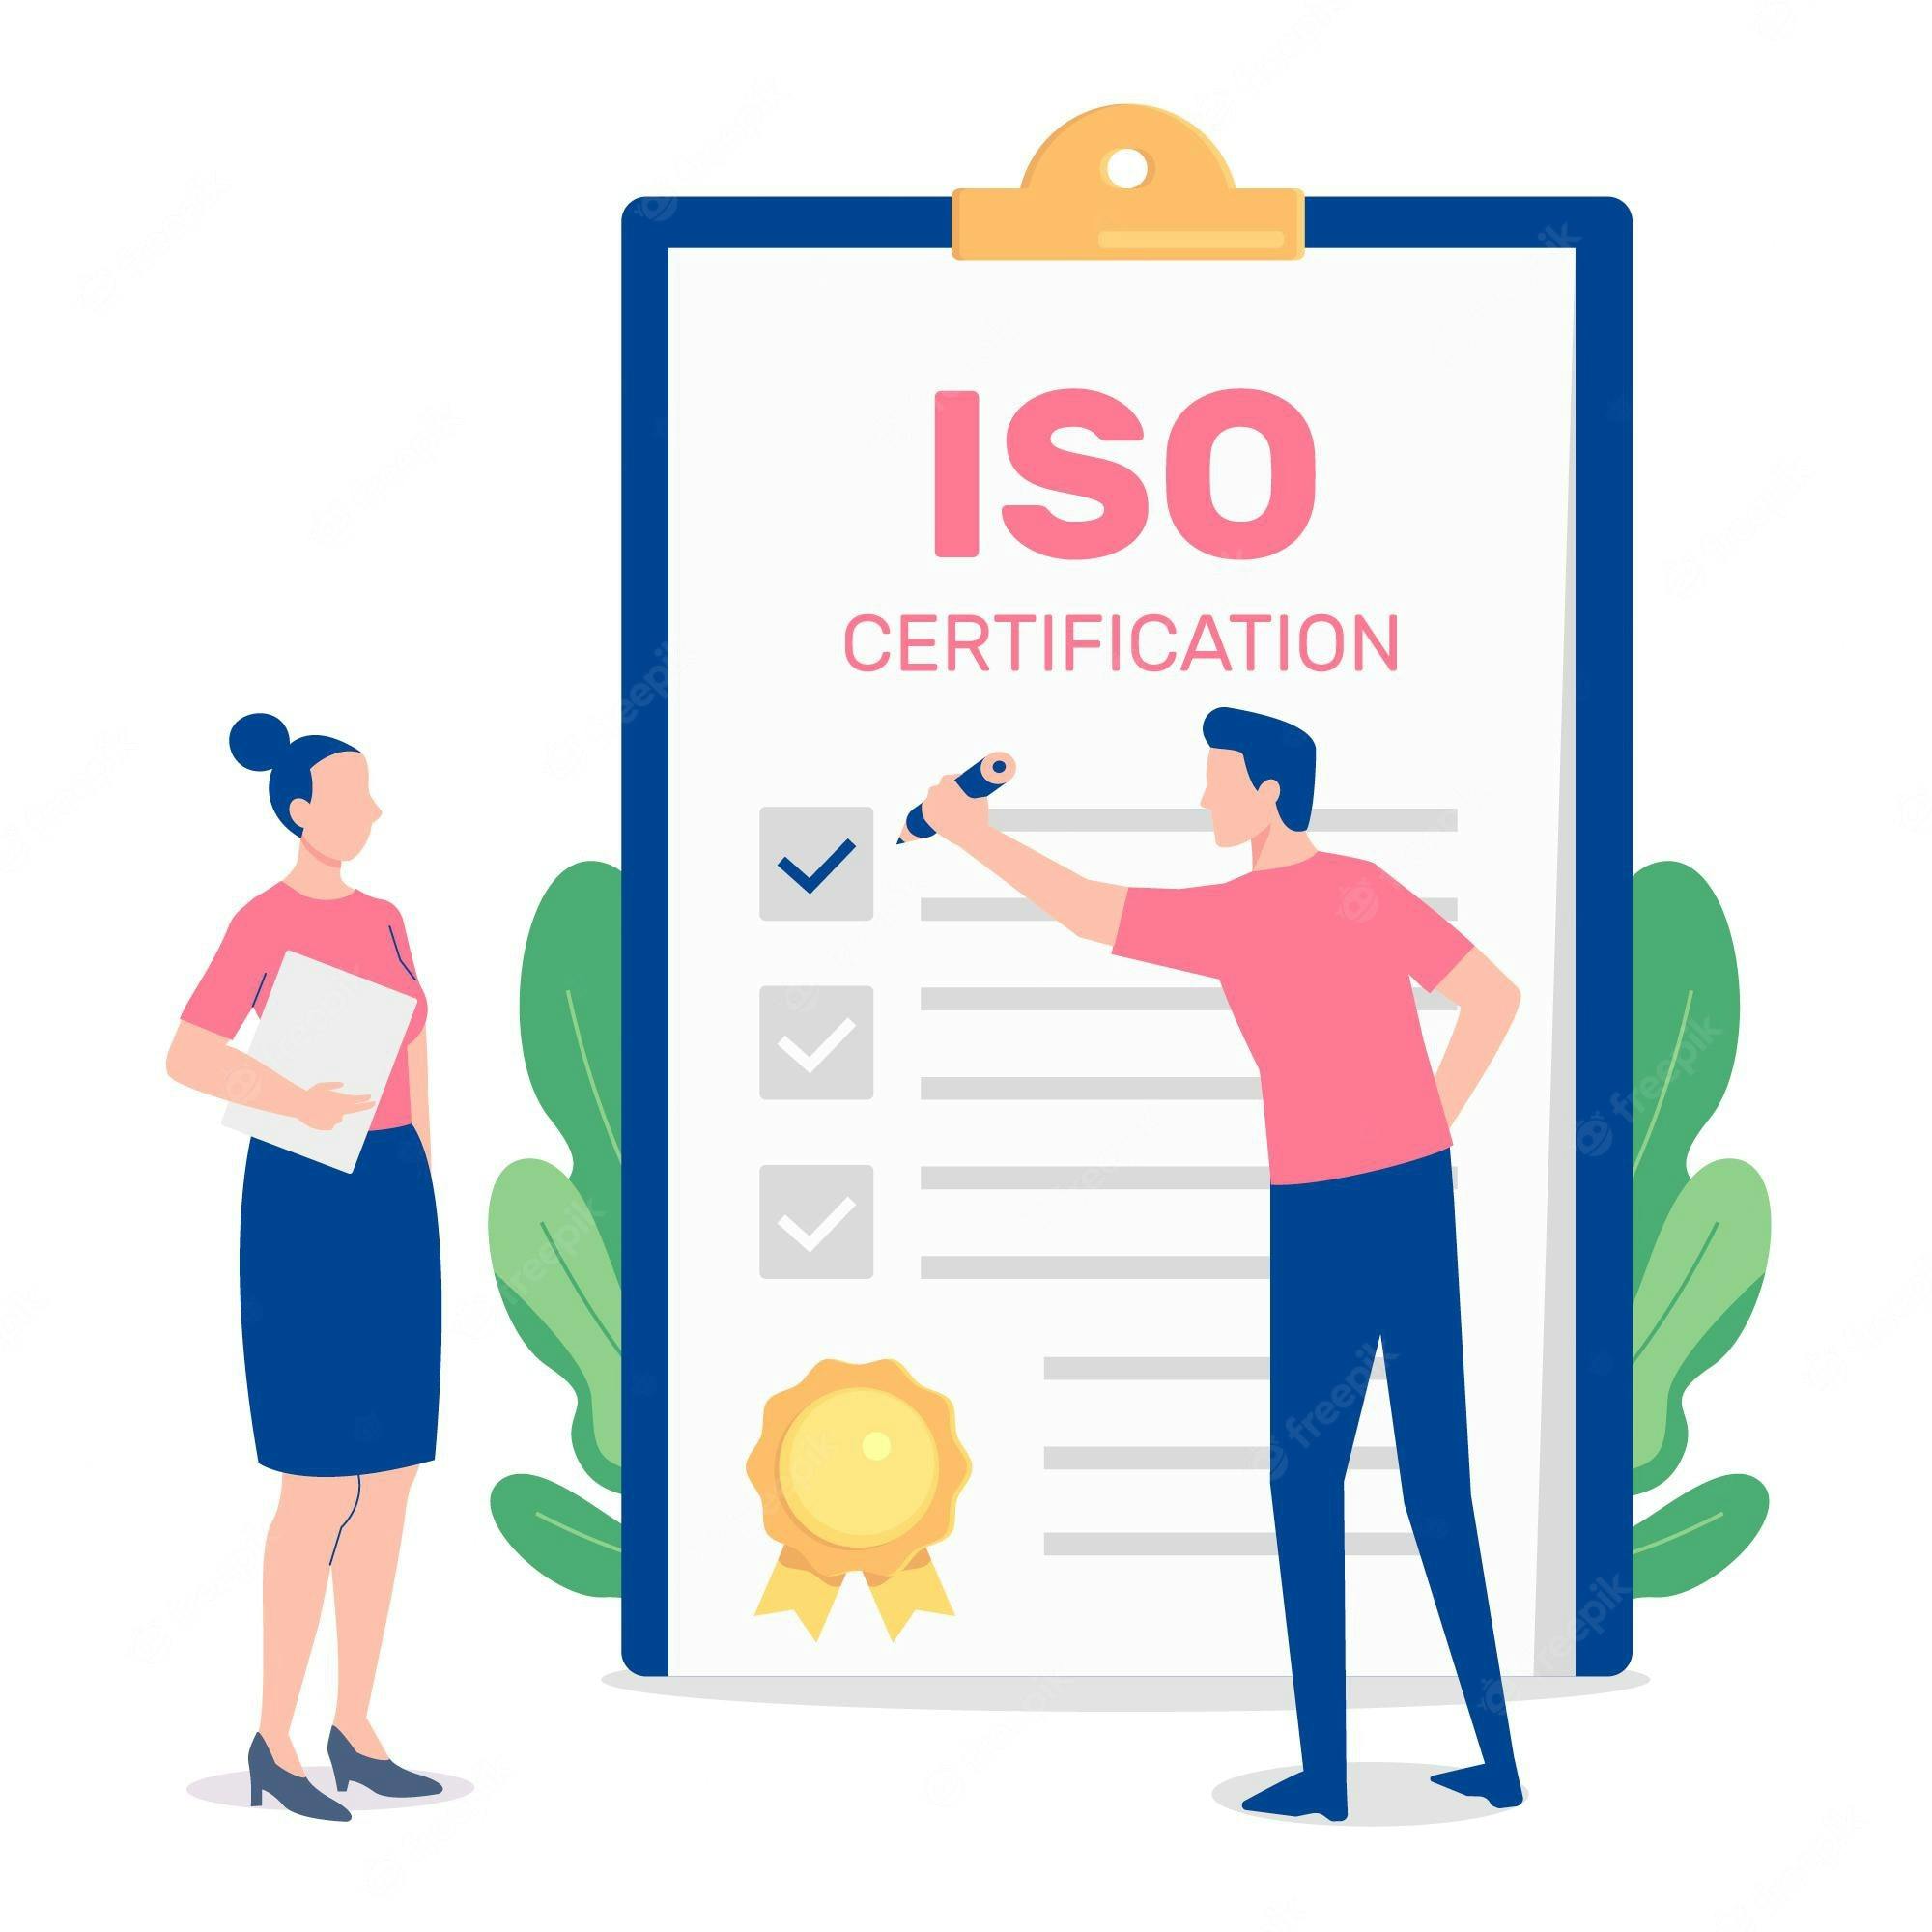 iso-certification-illustration-with-people-notepad_23-2148690777.jpg